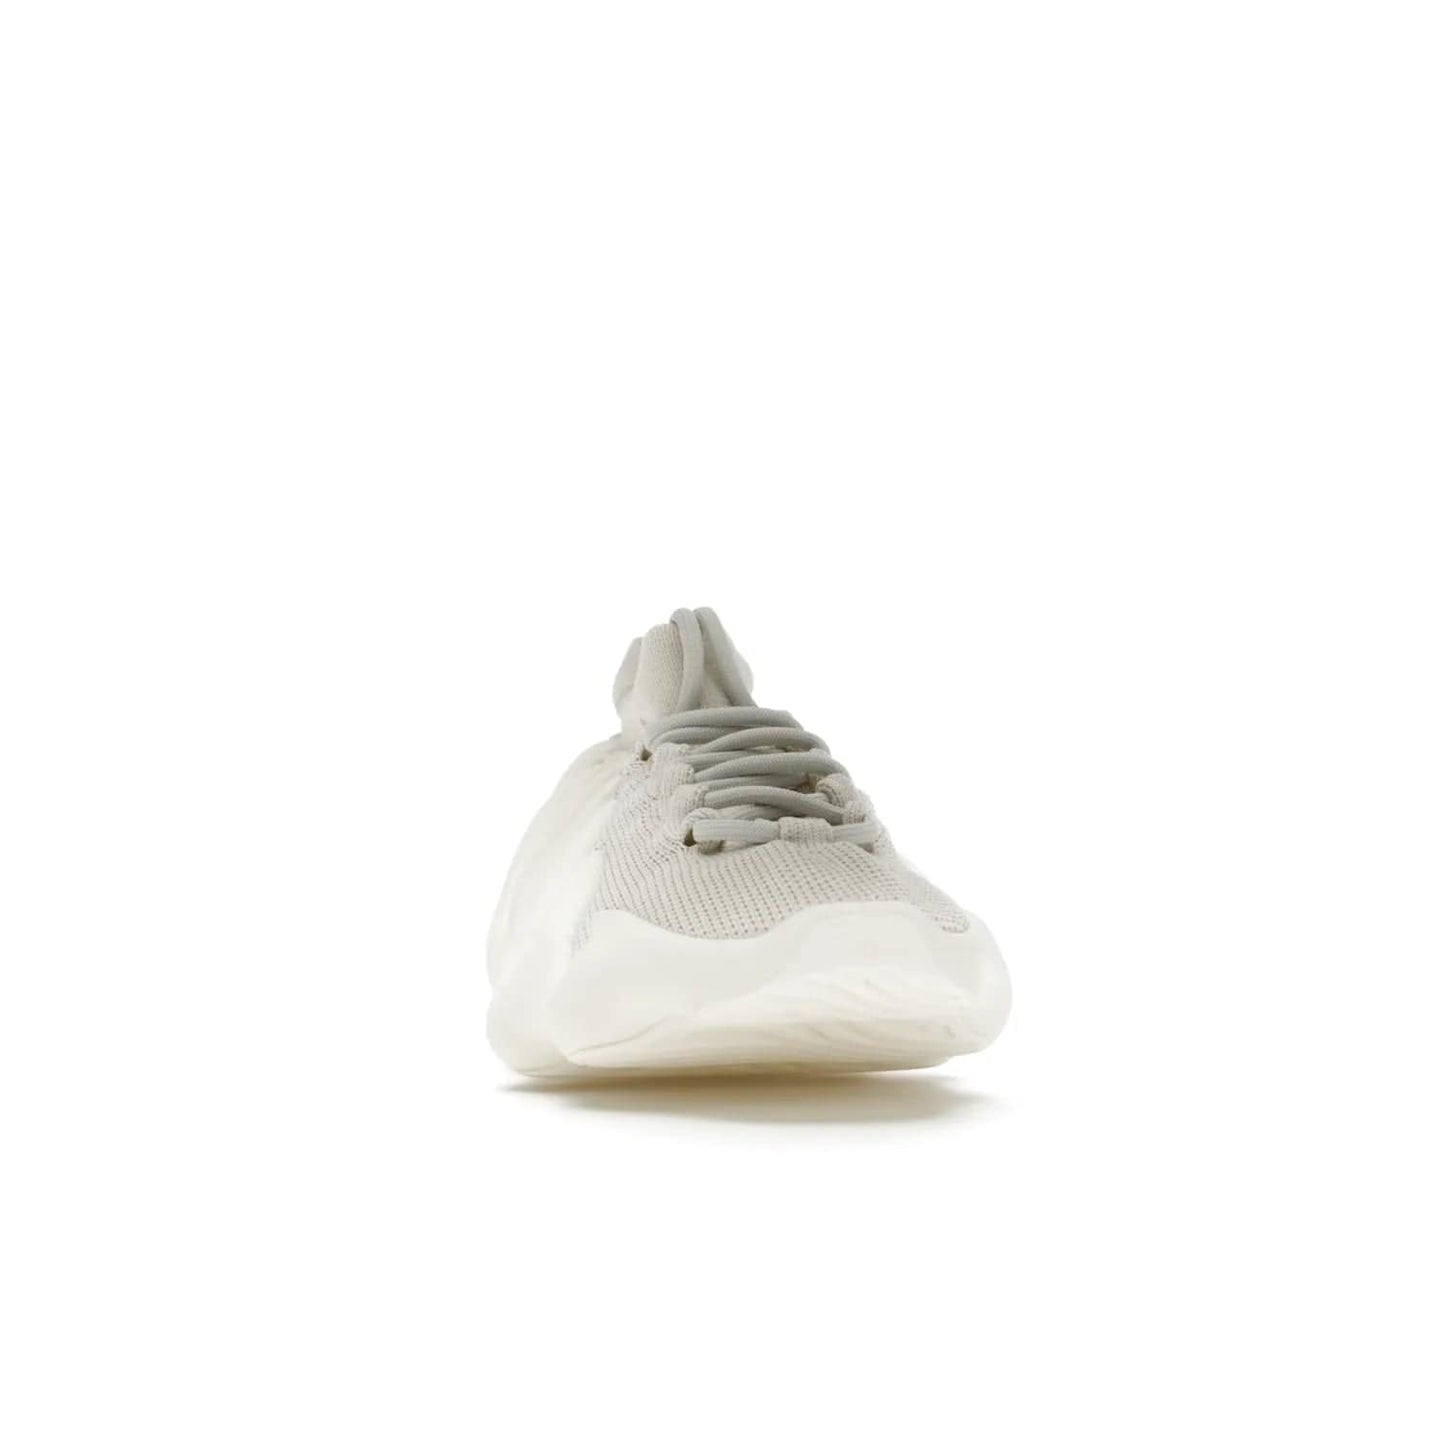 adidas Yeezy 450 Cloud White - Image 9 - Only at www.BallersClubKickz.com - Experience the future with the adidas Yeezy 450 Cloud White. A two-piece design featuring an extreme foam sole and mesh upper, this silhouette is expected to release in March 2021. Get your hands on this striking Cloud White/Cloud White colorway and stand out in the crowd.